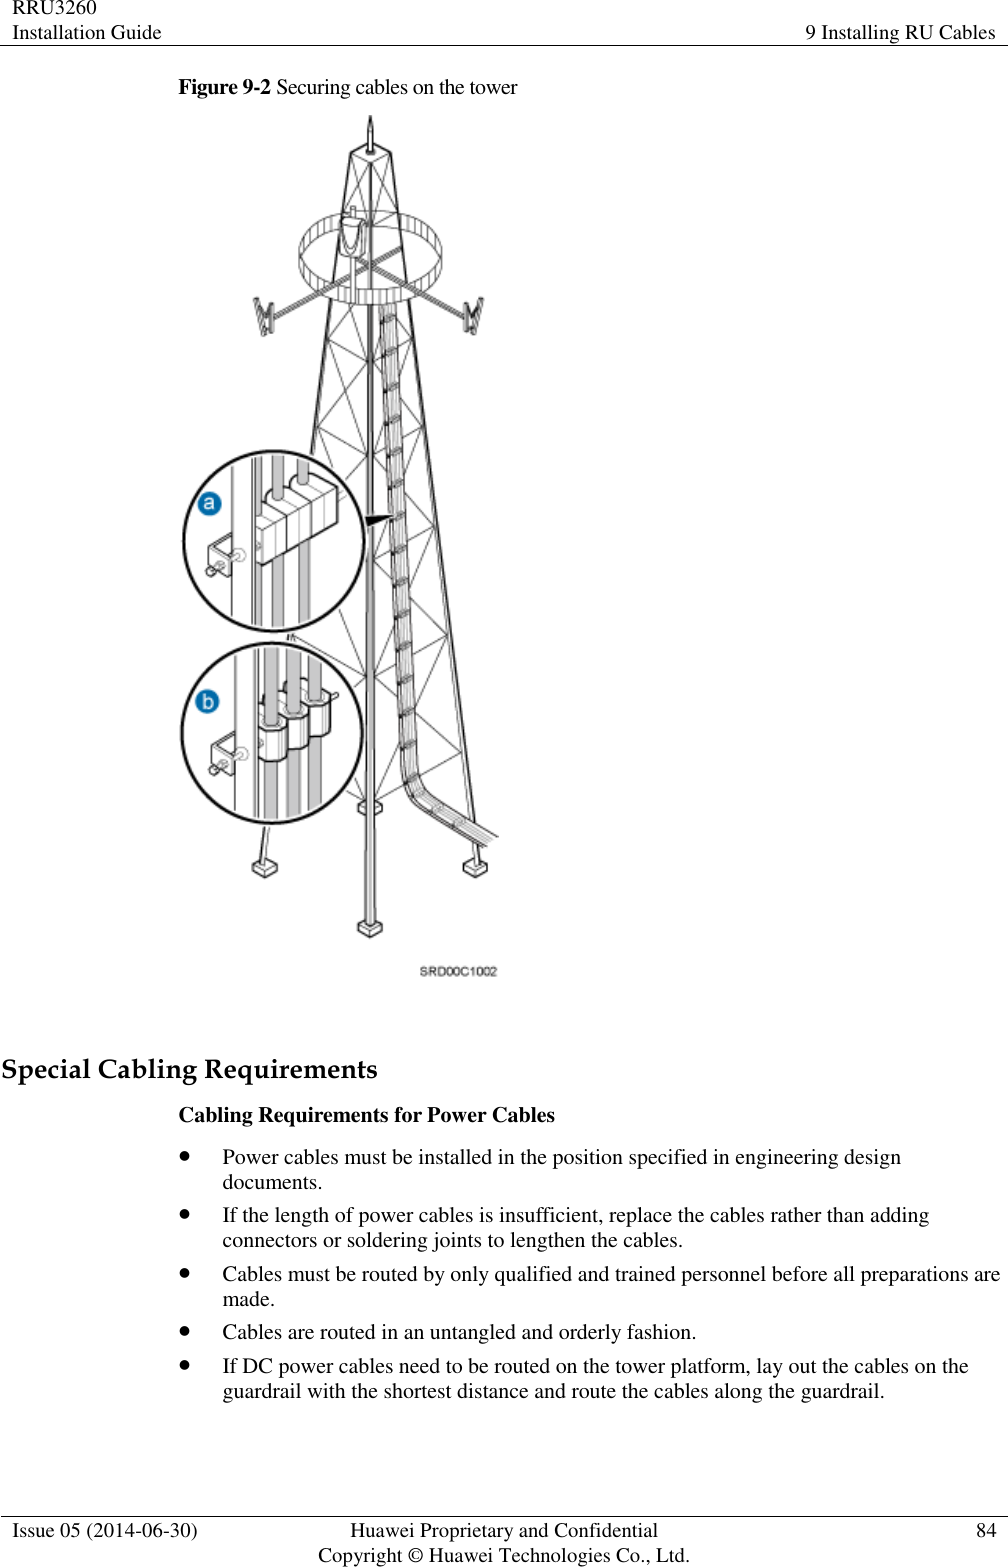 RRU3260 Installation Guide 9 Installing RU Cables  Issue 05 (2014-06-30) Huawei Proprietary and Confidential                                     Copyright © Huawei Technologies Co., Ltd. 84  Figure 9-2 Securing cables on the tower   Special Cabling Requirements Cabling Requirements for Power Cables  Power cables must be installed in the position specified in engineering design documents.  If the length of power cables is insufficient, replace the cables rather than adding connectors or soldering joints to lengthen the cables.  Cables must be routed by only qualified and trained personnel before all preparations are made.  Cables are routed in an untangled and orderly fashion.  If DC power cables need to be routed on the tower platform, lay out the cables on the guardrail with the shortest distance and route the cables along the guardrail. 